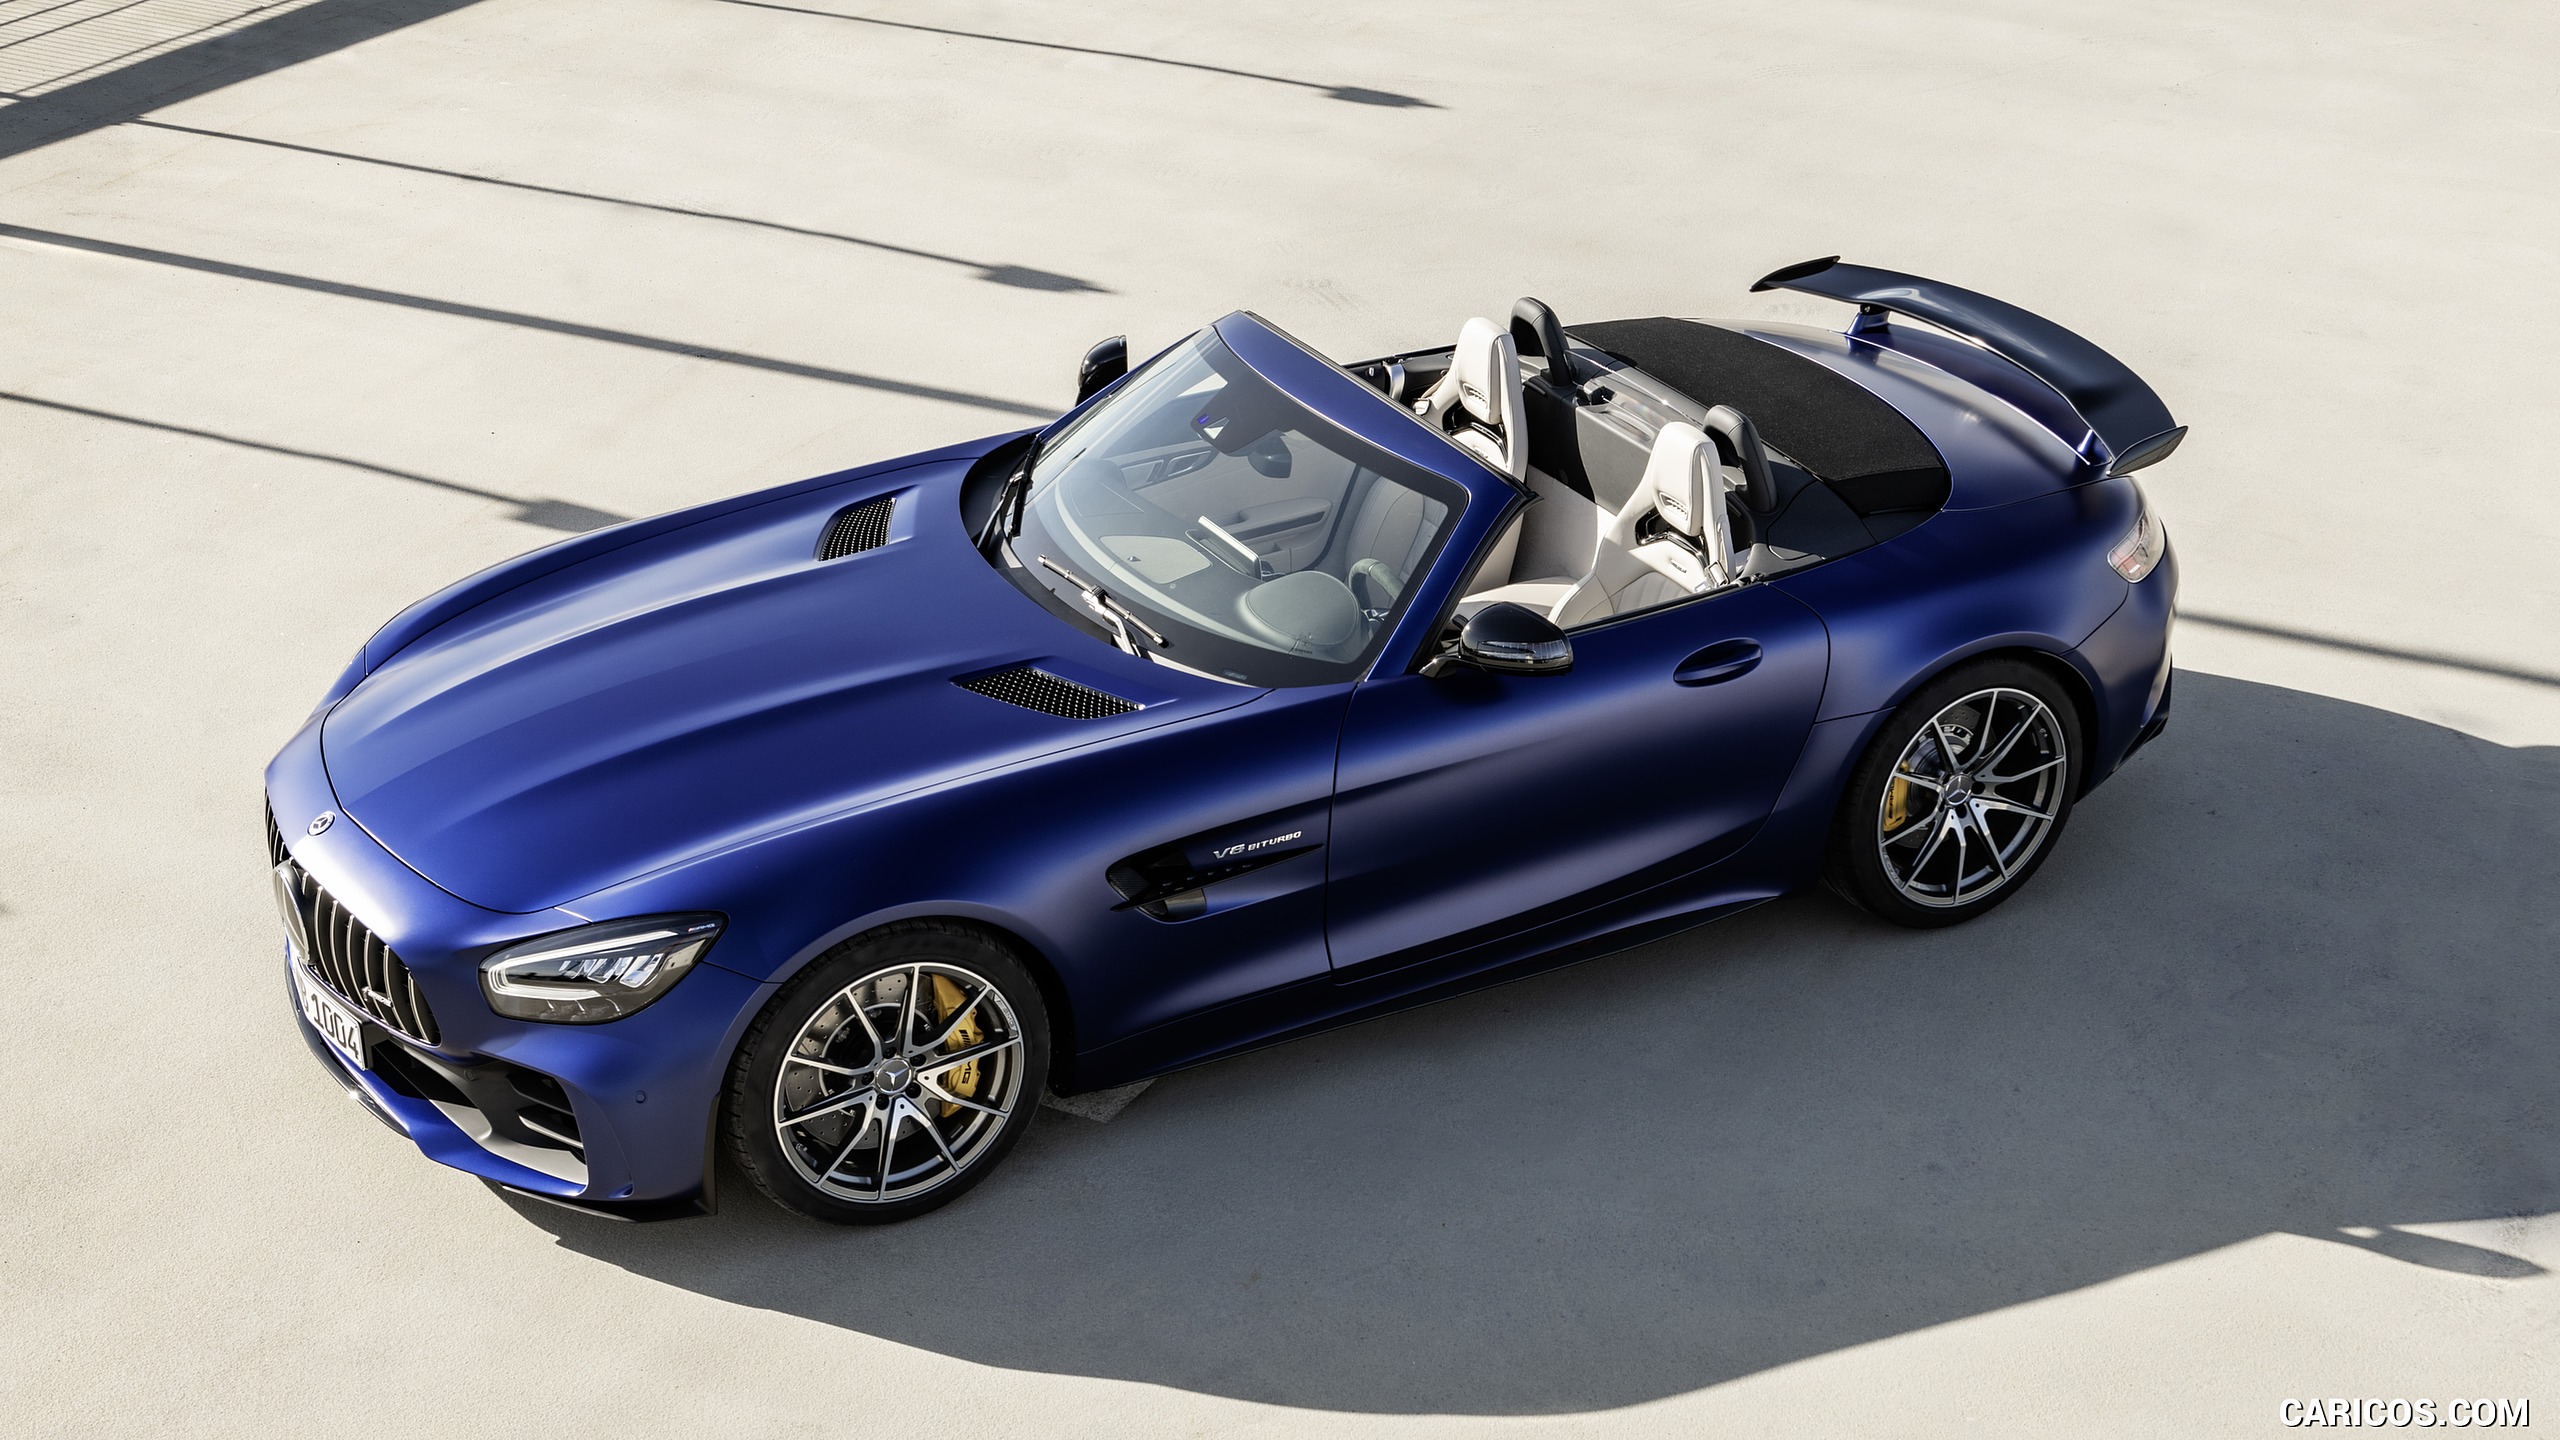 2020 Mercedes-AMG GT R Roadster - Front Three-Quarter, #9 of 246